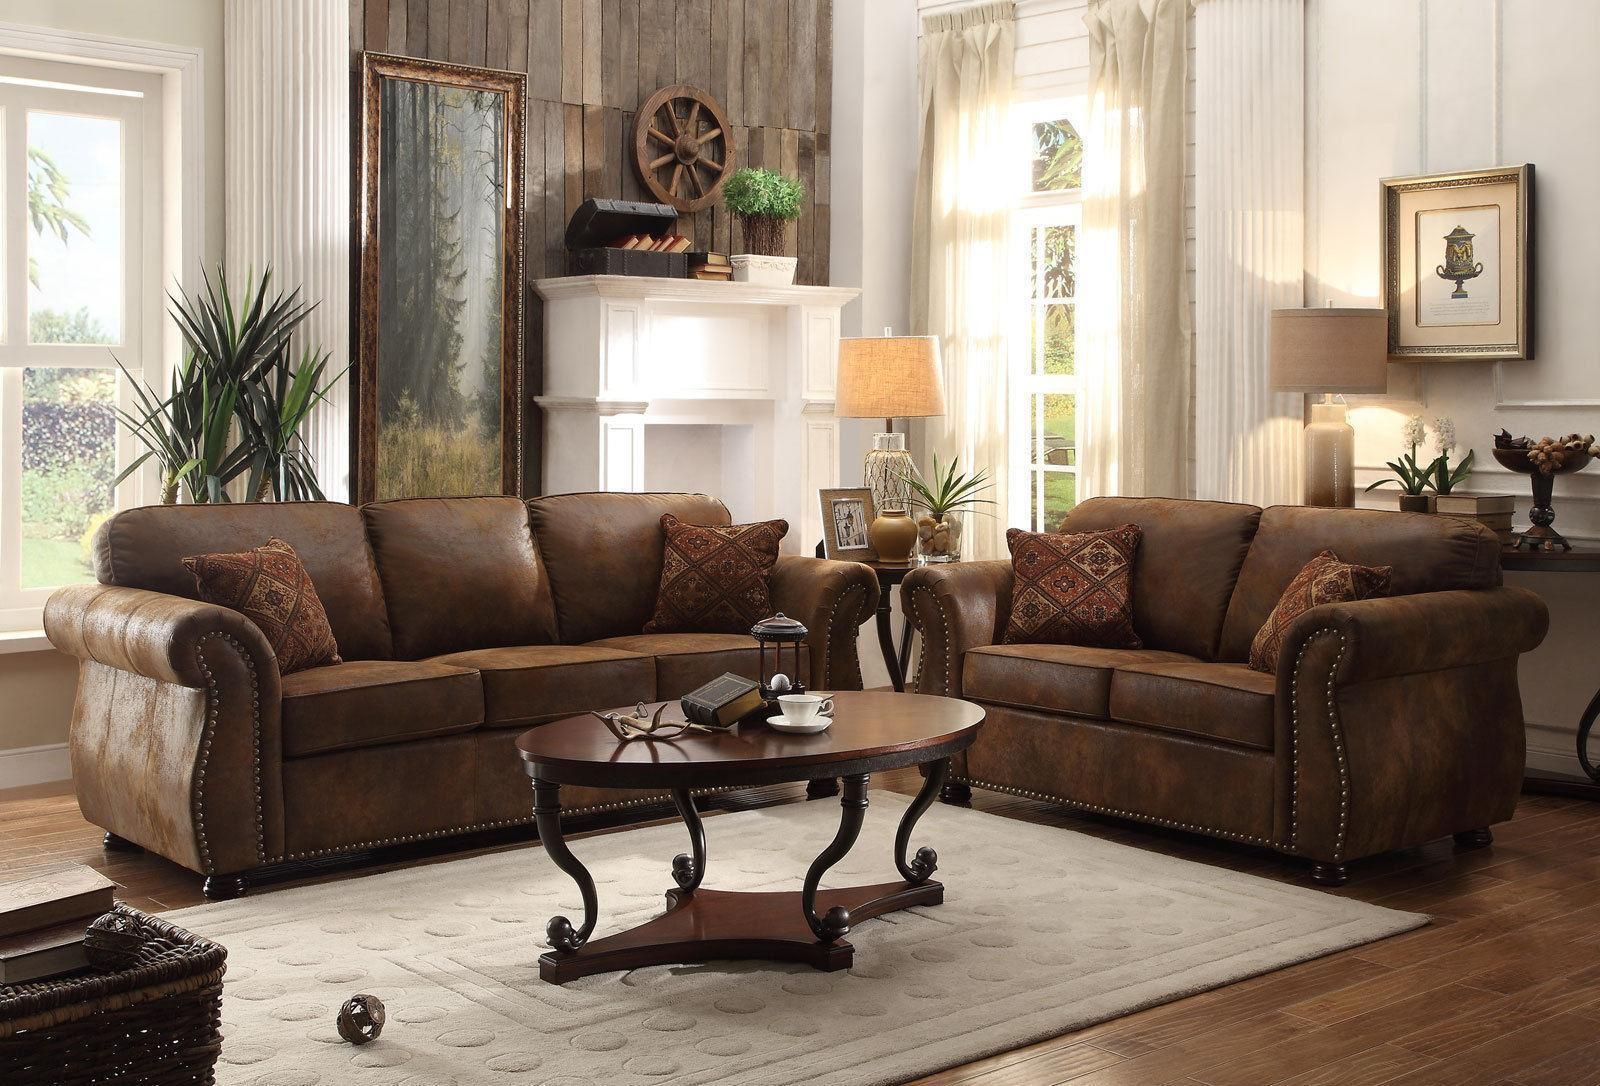 Westwood Rustic Brown Living Room Furniture Faux Leather Sofa Couch Pertaining To Faux Leather Sofas In Chocolate Brown (Gallery 10 of 20)